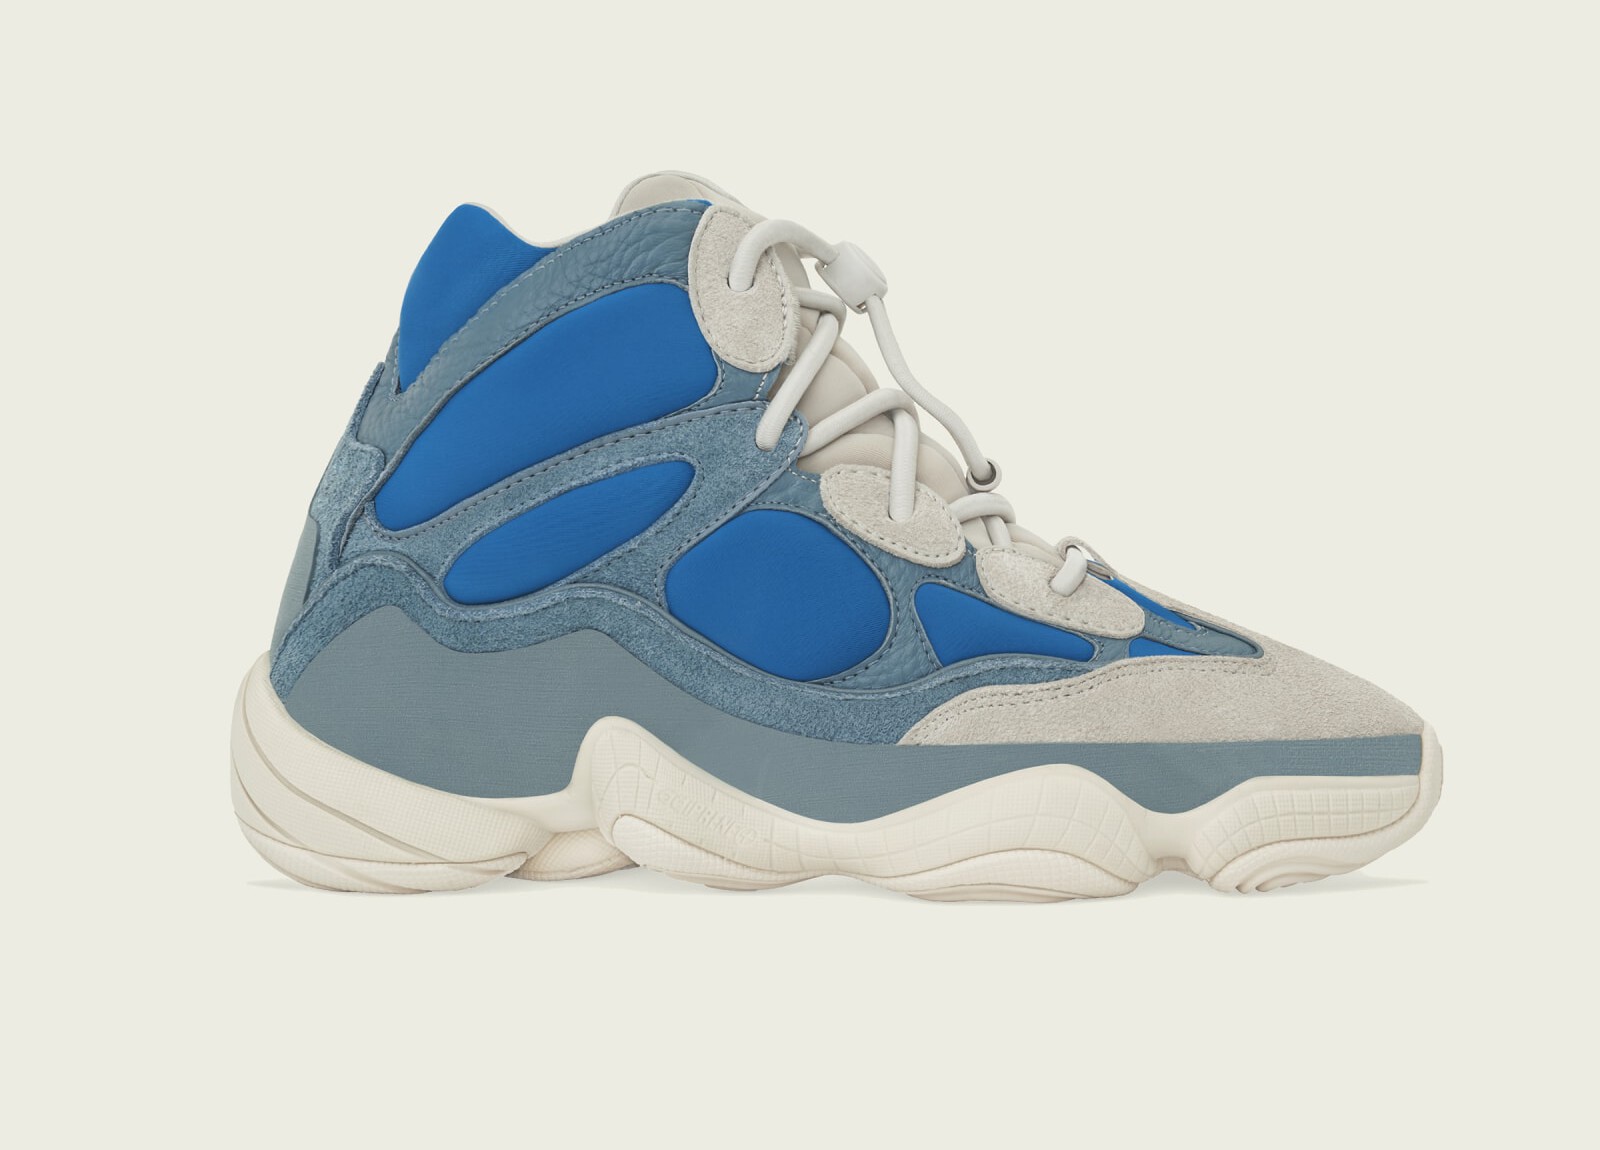 Adidas Yeezy 500 High
« Frosted Blue »